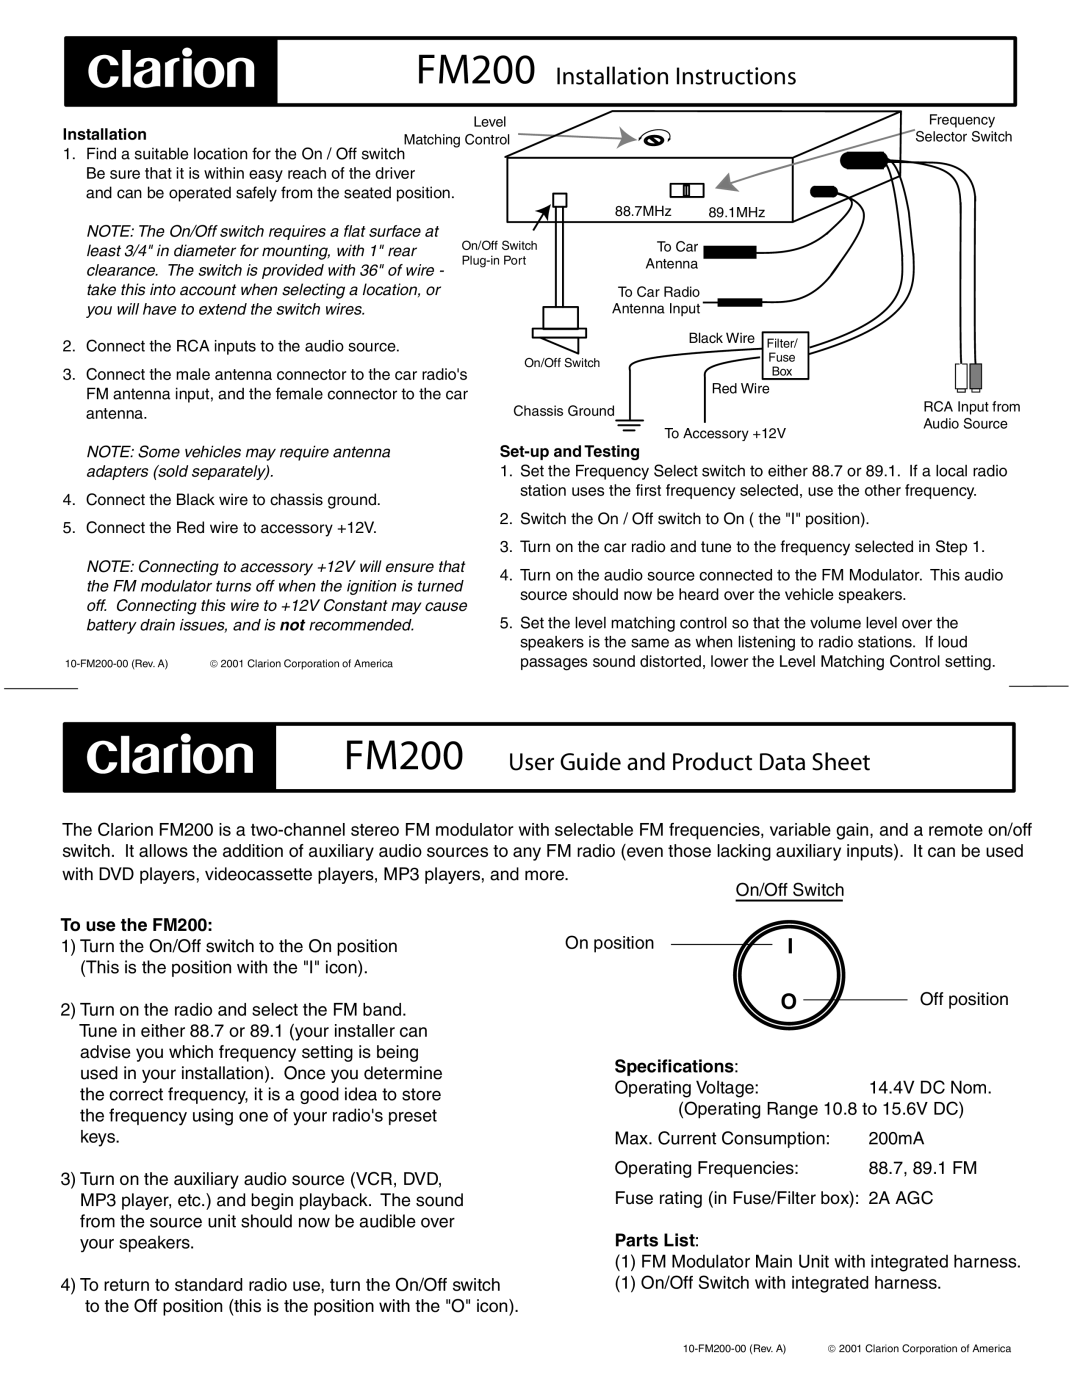 Clarion installation instructions FM200 Installation Instructions, FM200 User Guide and Product Data Sheet, Parts List 